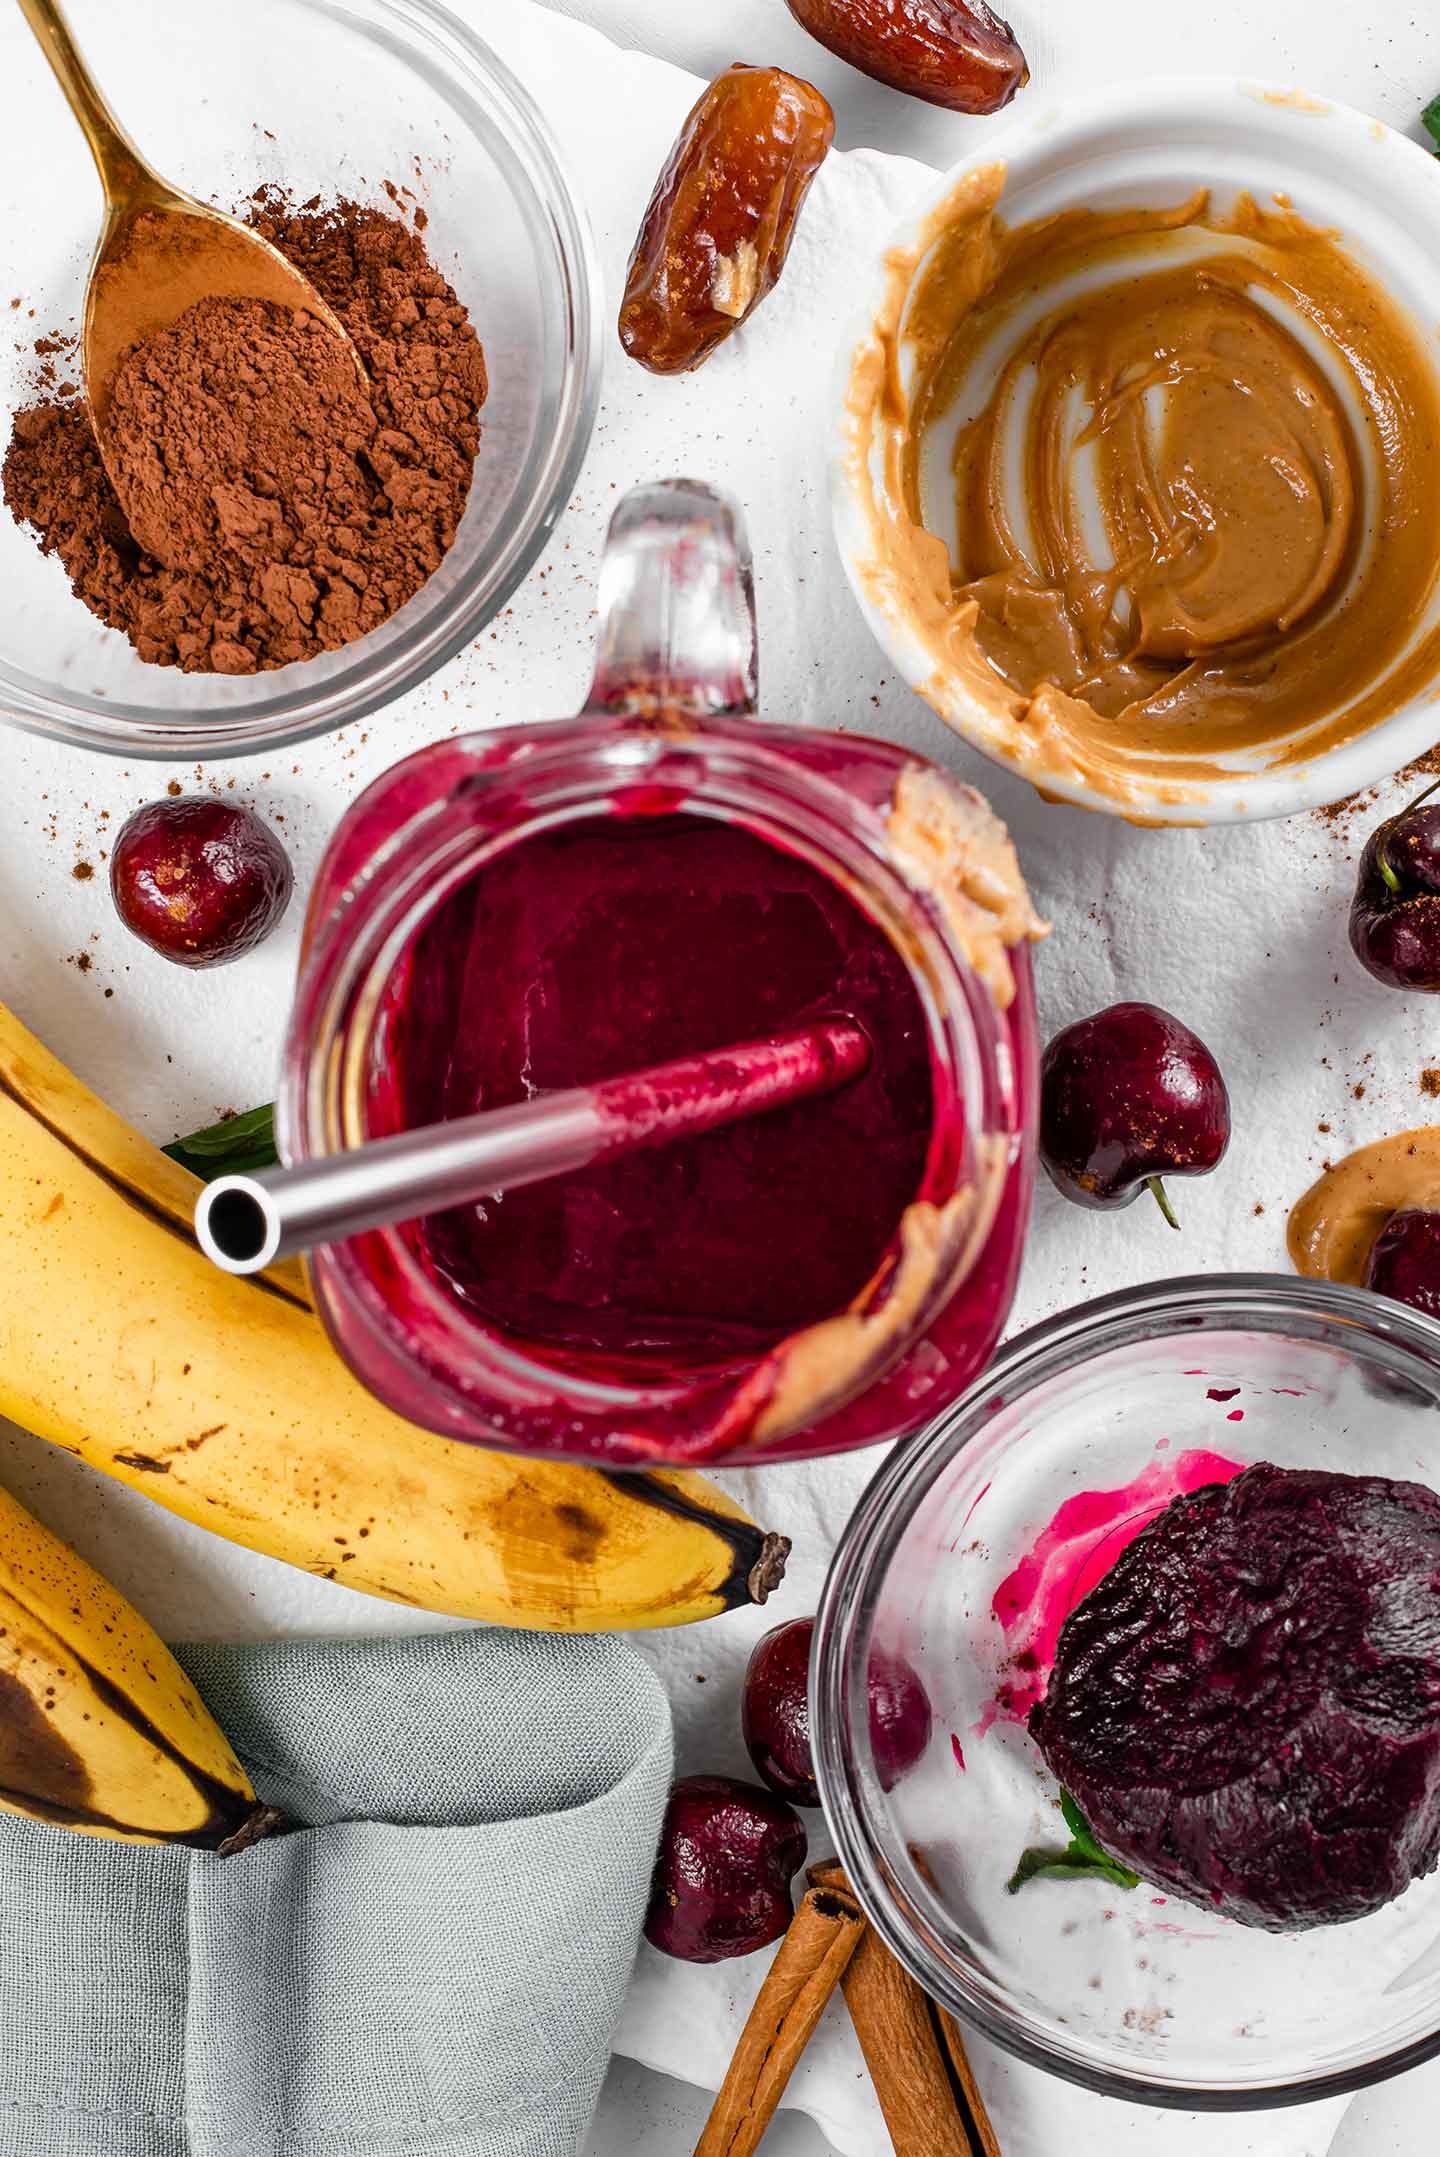 Top down view of a half drunk chocolate beet smoothie with a stainless steel straw. A roasted beet rests in a glass dish to the side. Bananas, cocoa powder, peanut butter, cherries, and dates are scattered around.